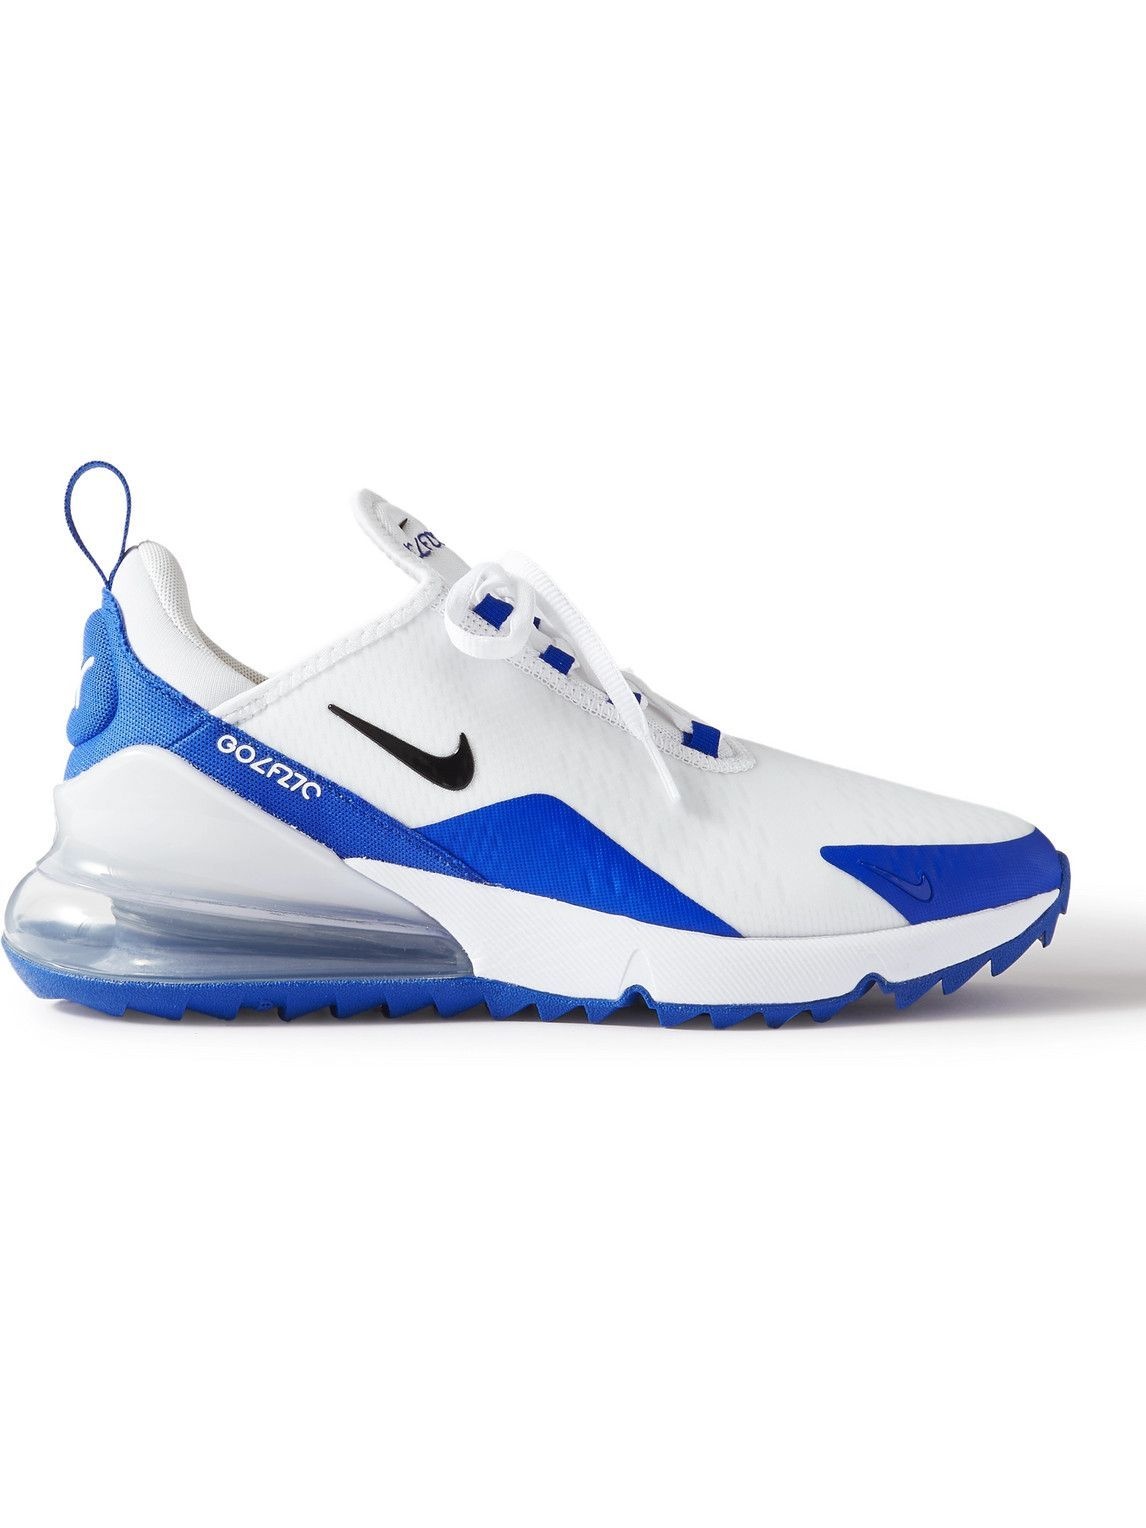 Nike Golf - Air Max 270 G Rubber-Trimmed Ripstop and Mesh Golf